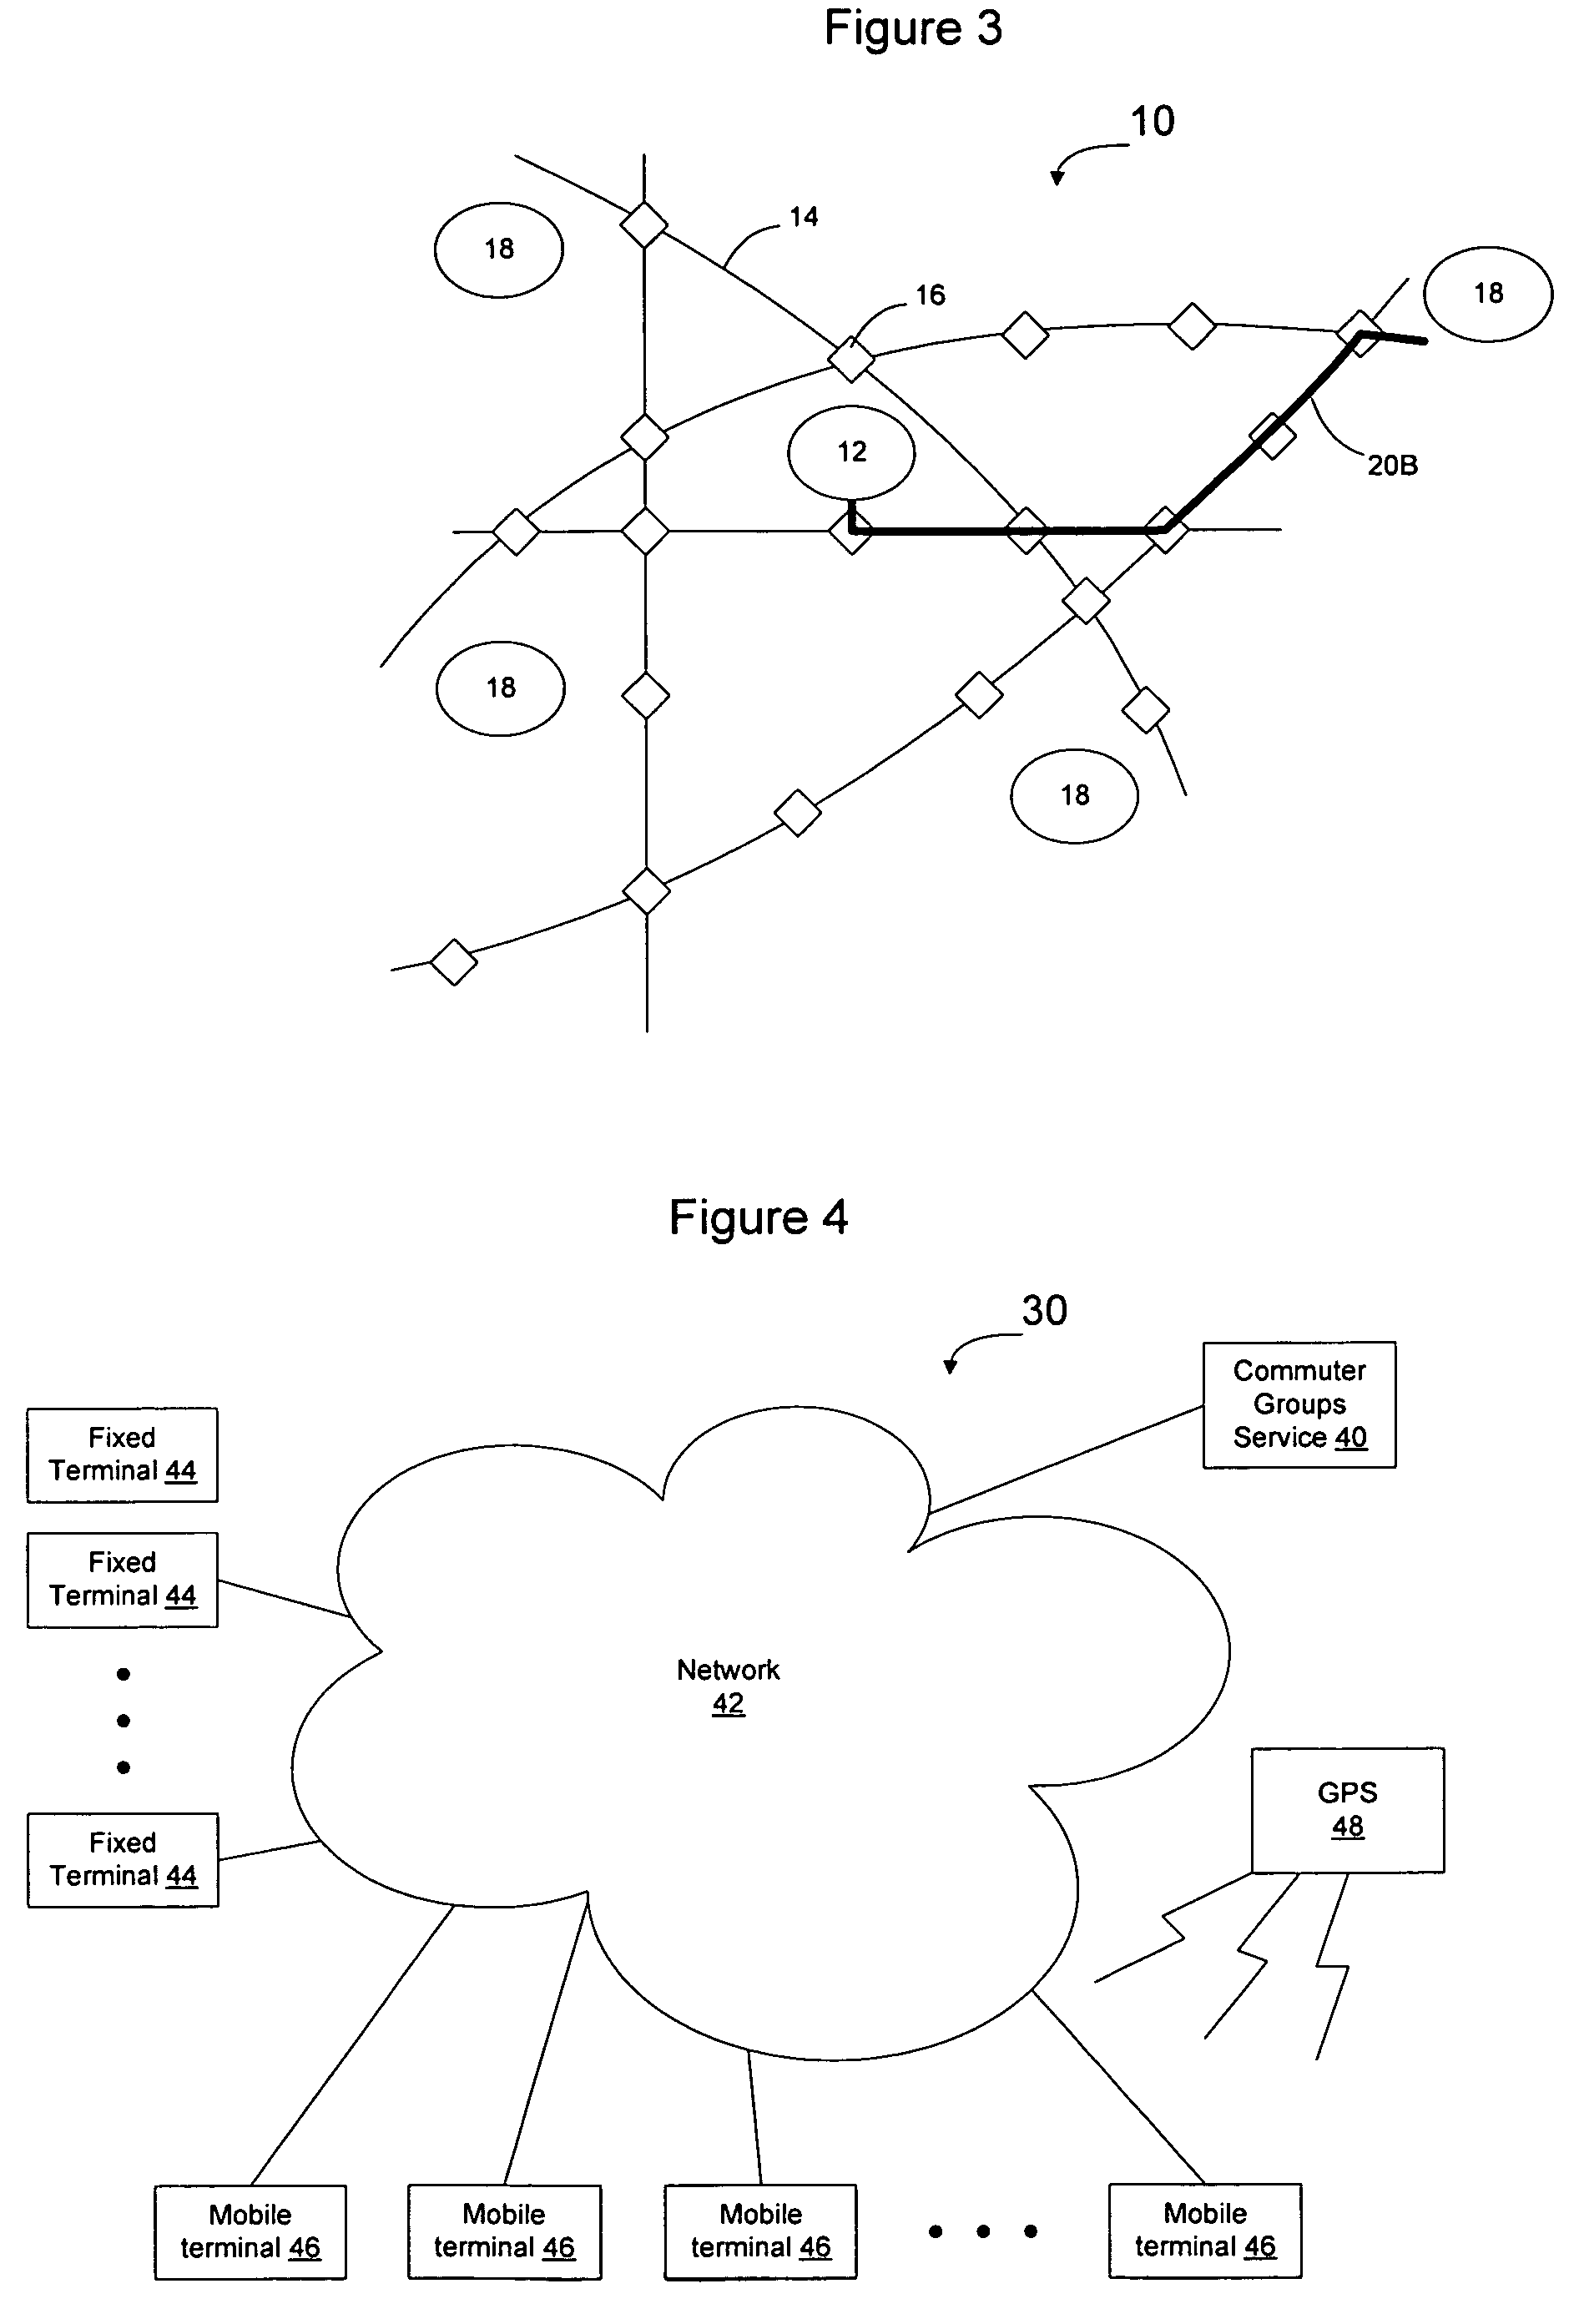 Method and apparatus for enabling commuter groups